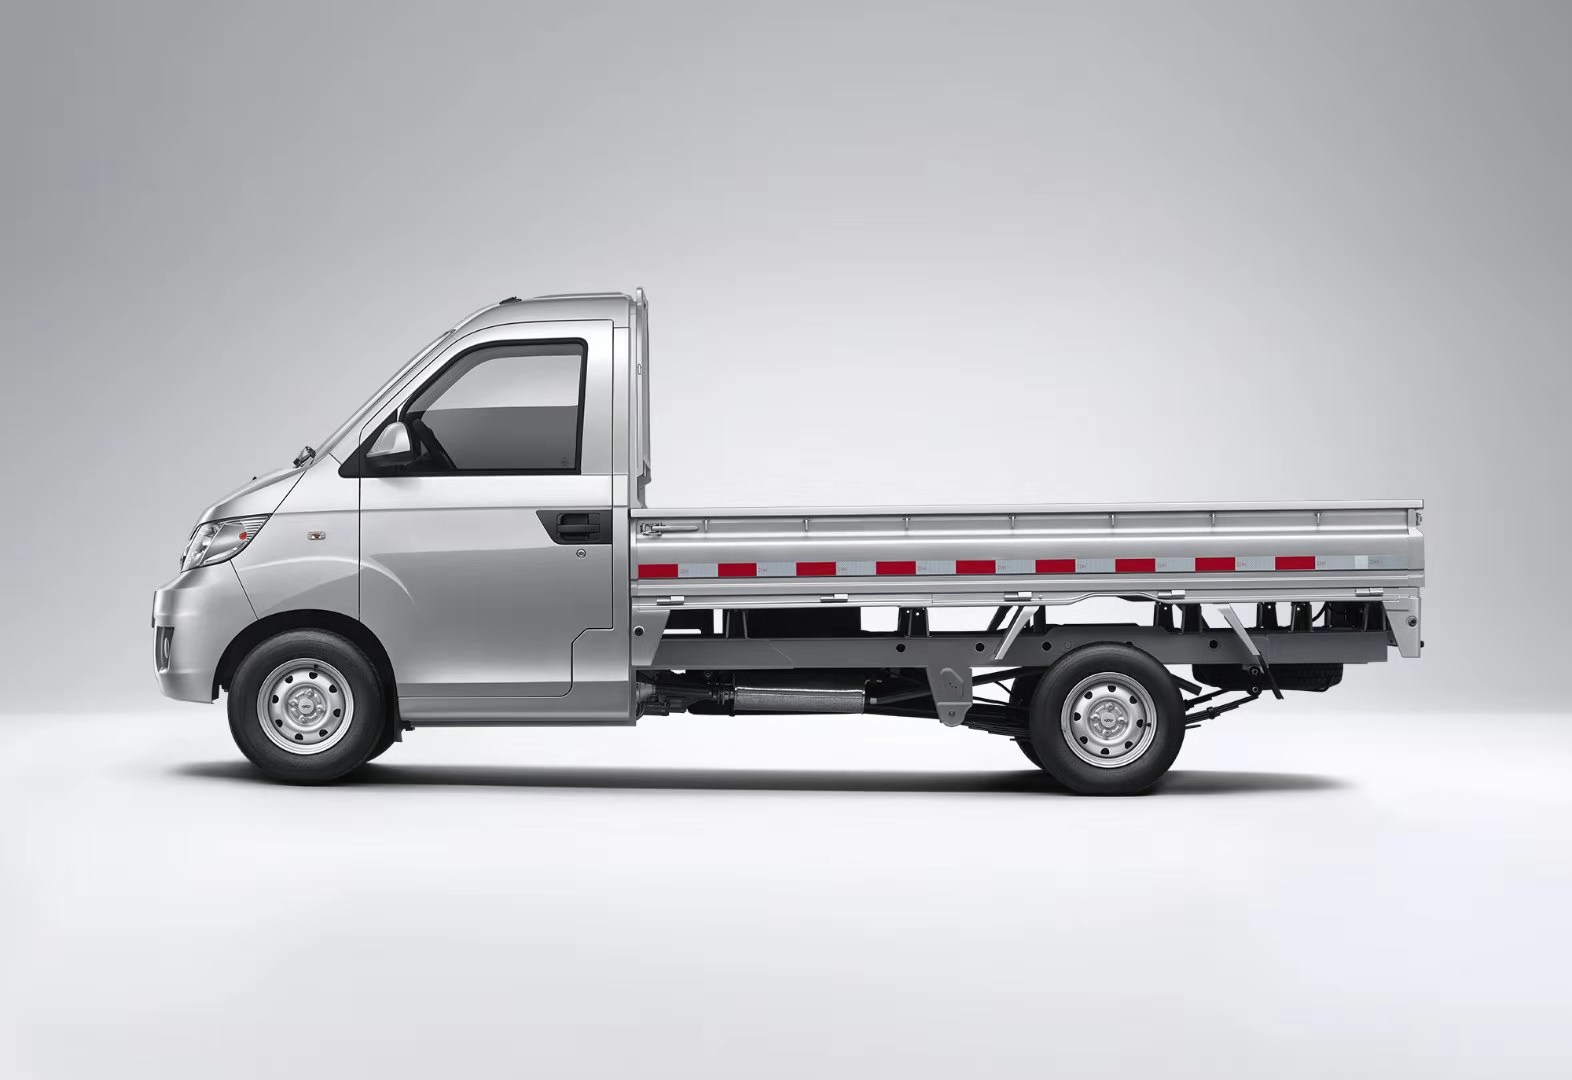 JOKUL 1-1.5tons Gasoline Minitruck with 1.1L to 1.5L engine and single or double cabin